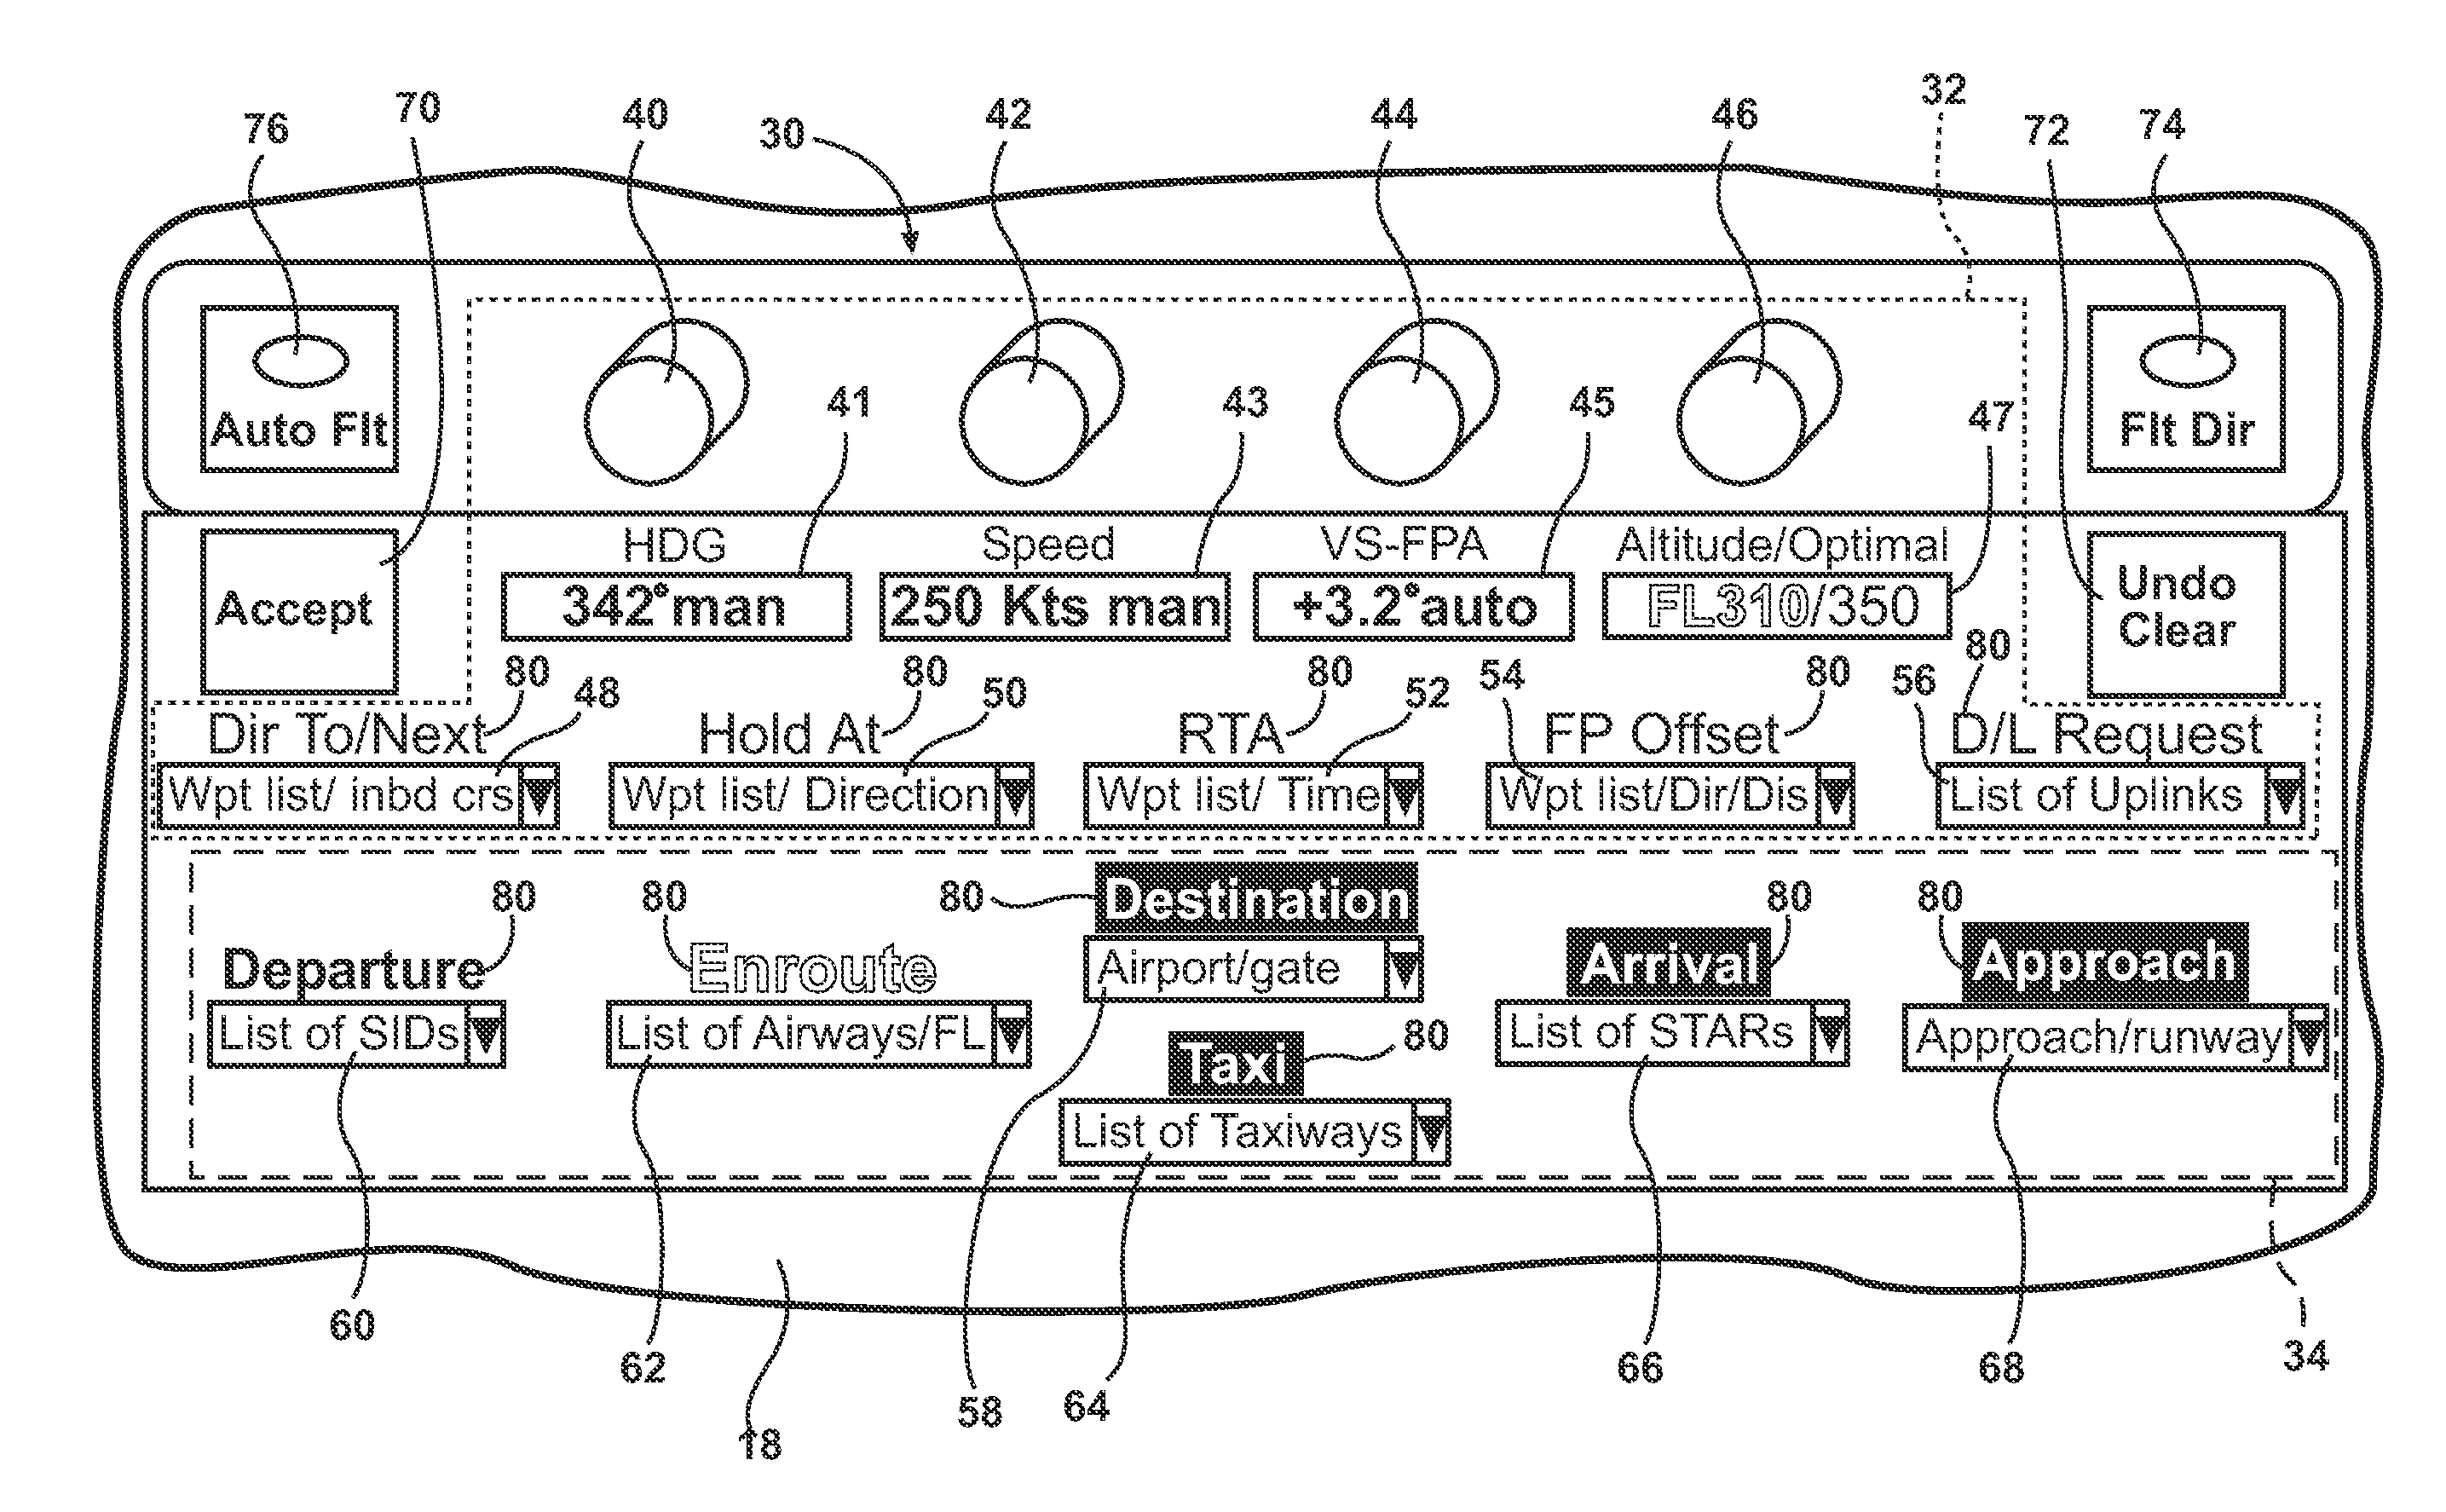 Simplified user interface for an aircraft